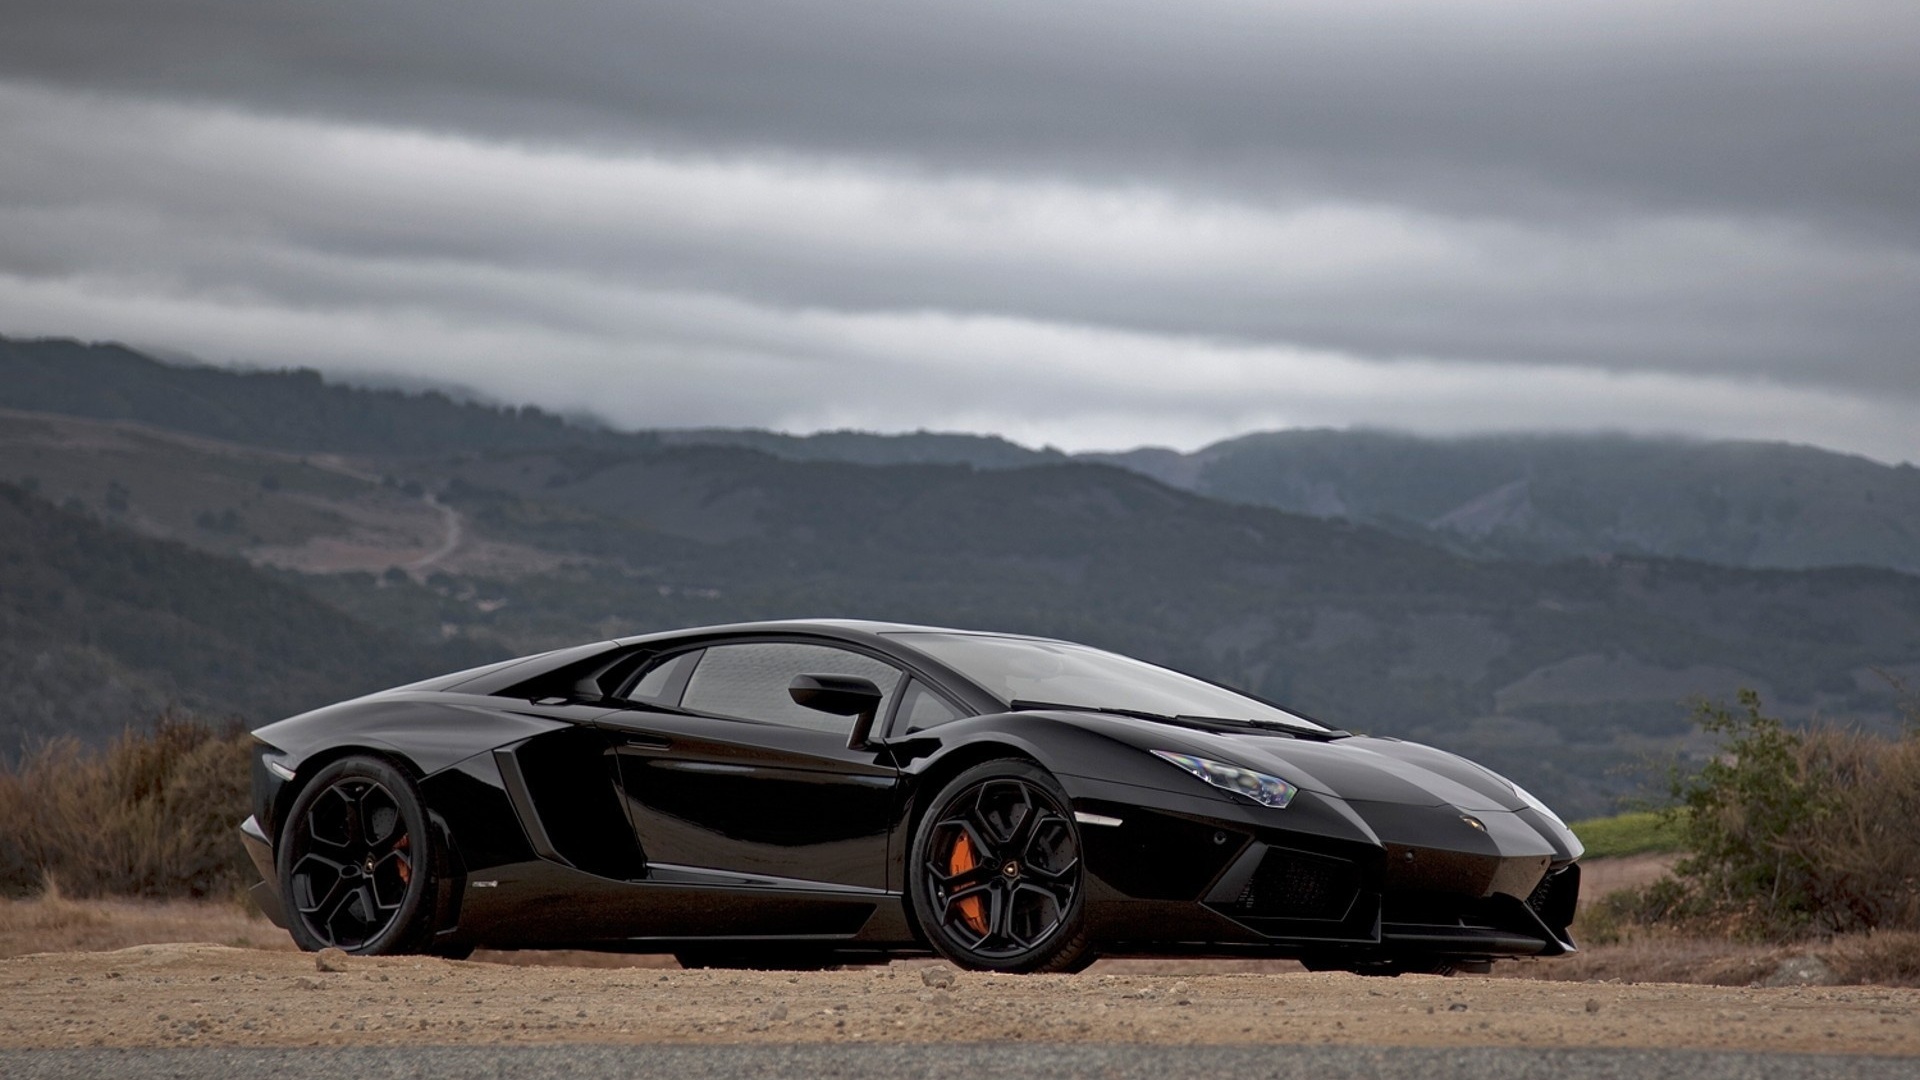 Collection Of Lamborghini Aventador Wallpaper In Various Styles Here